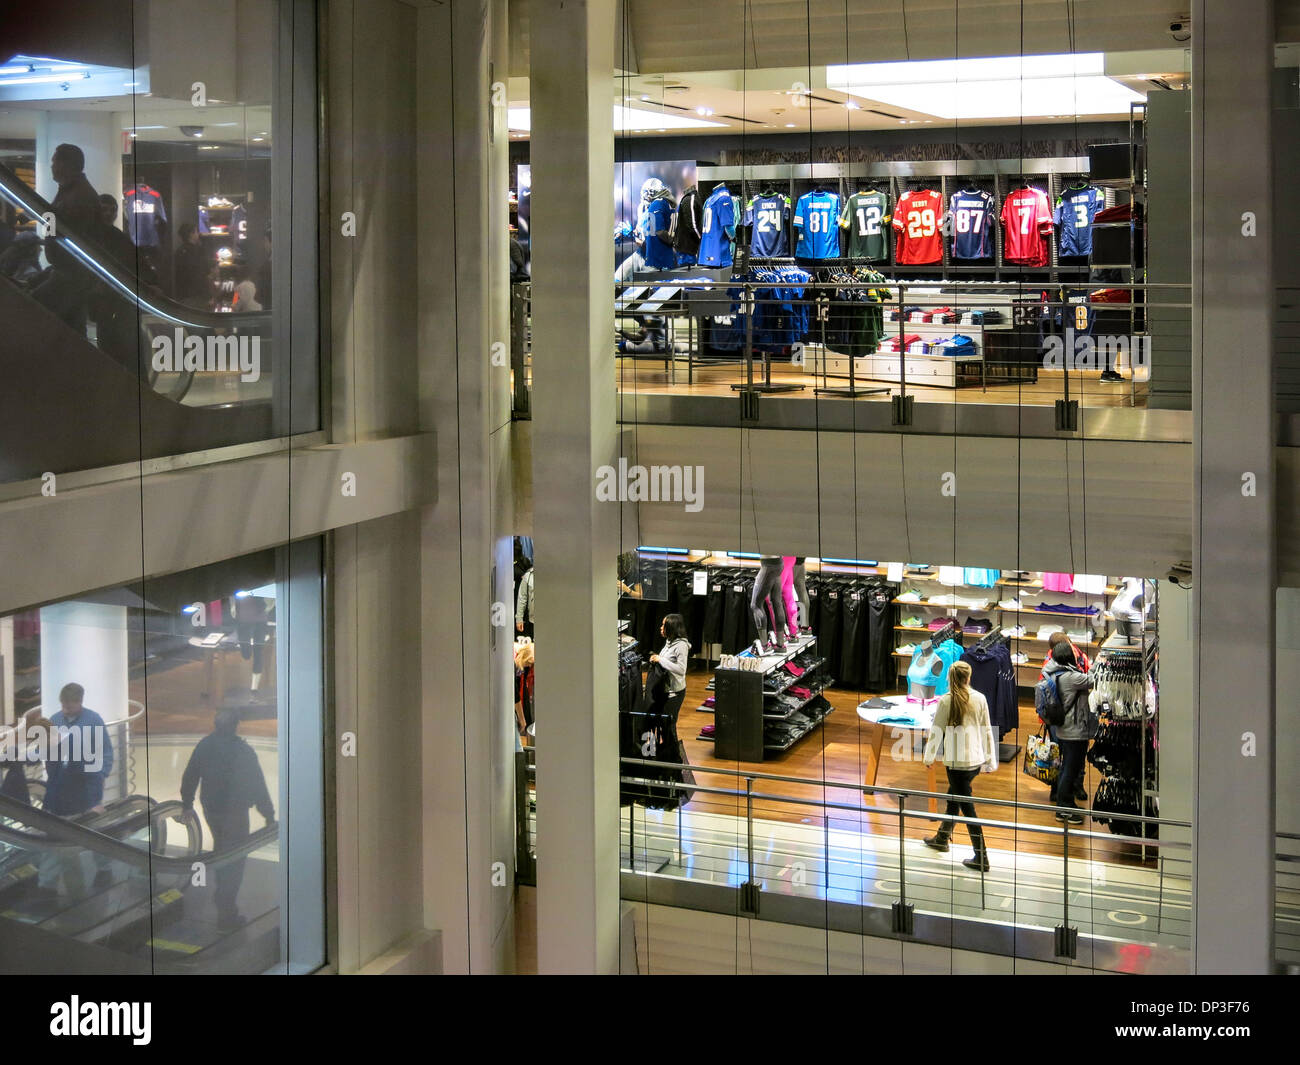 Niketown Athletic Apparel Store,Featuring Nike Shoes with Swoosh Logo,  Interior, 6 East 57th Street, NYC Stock Photo - Alamy